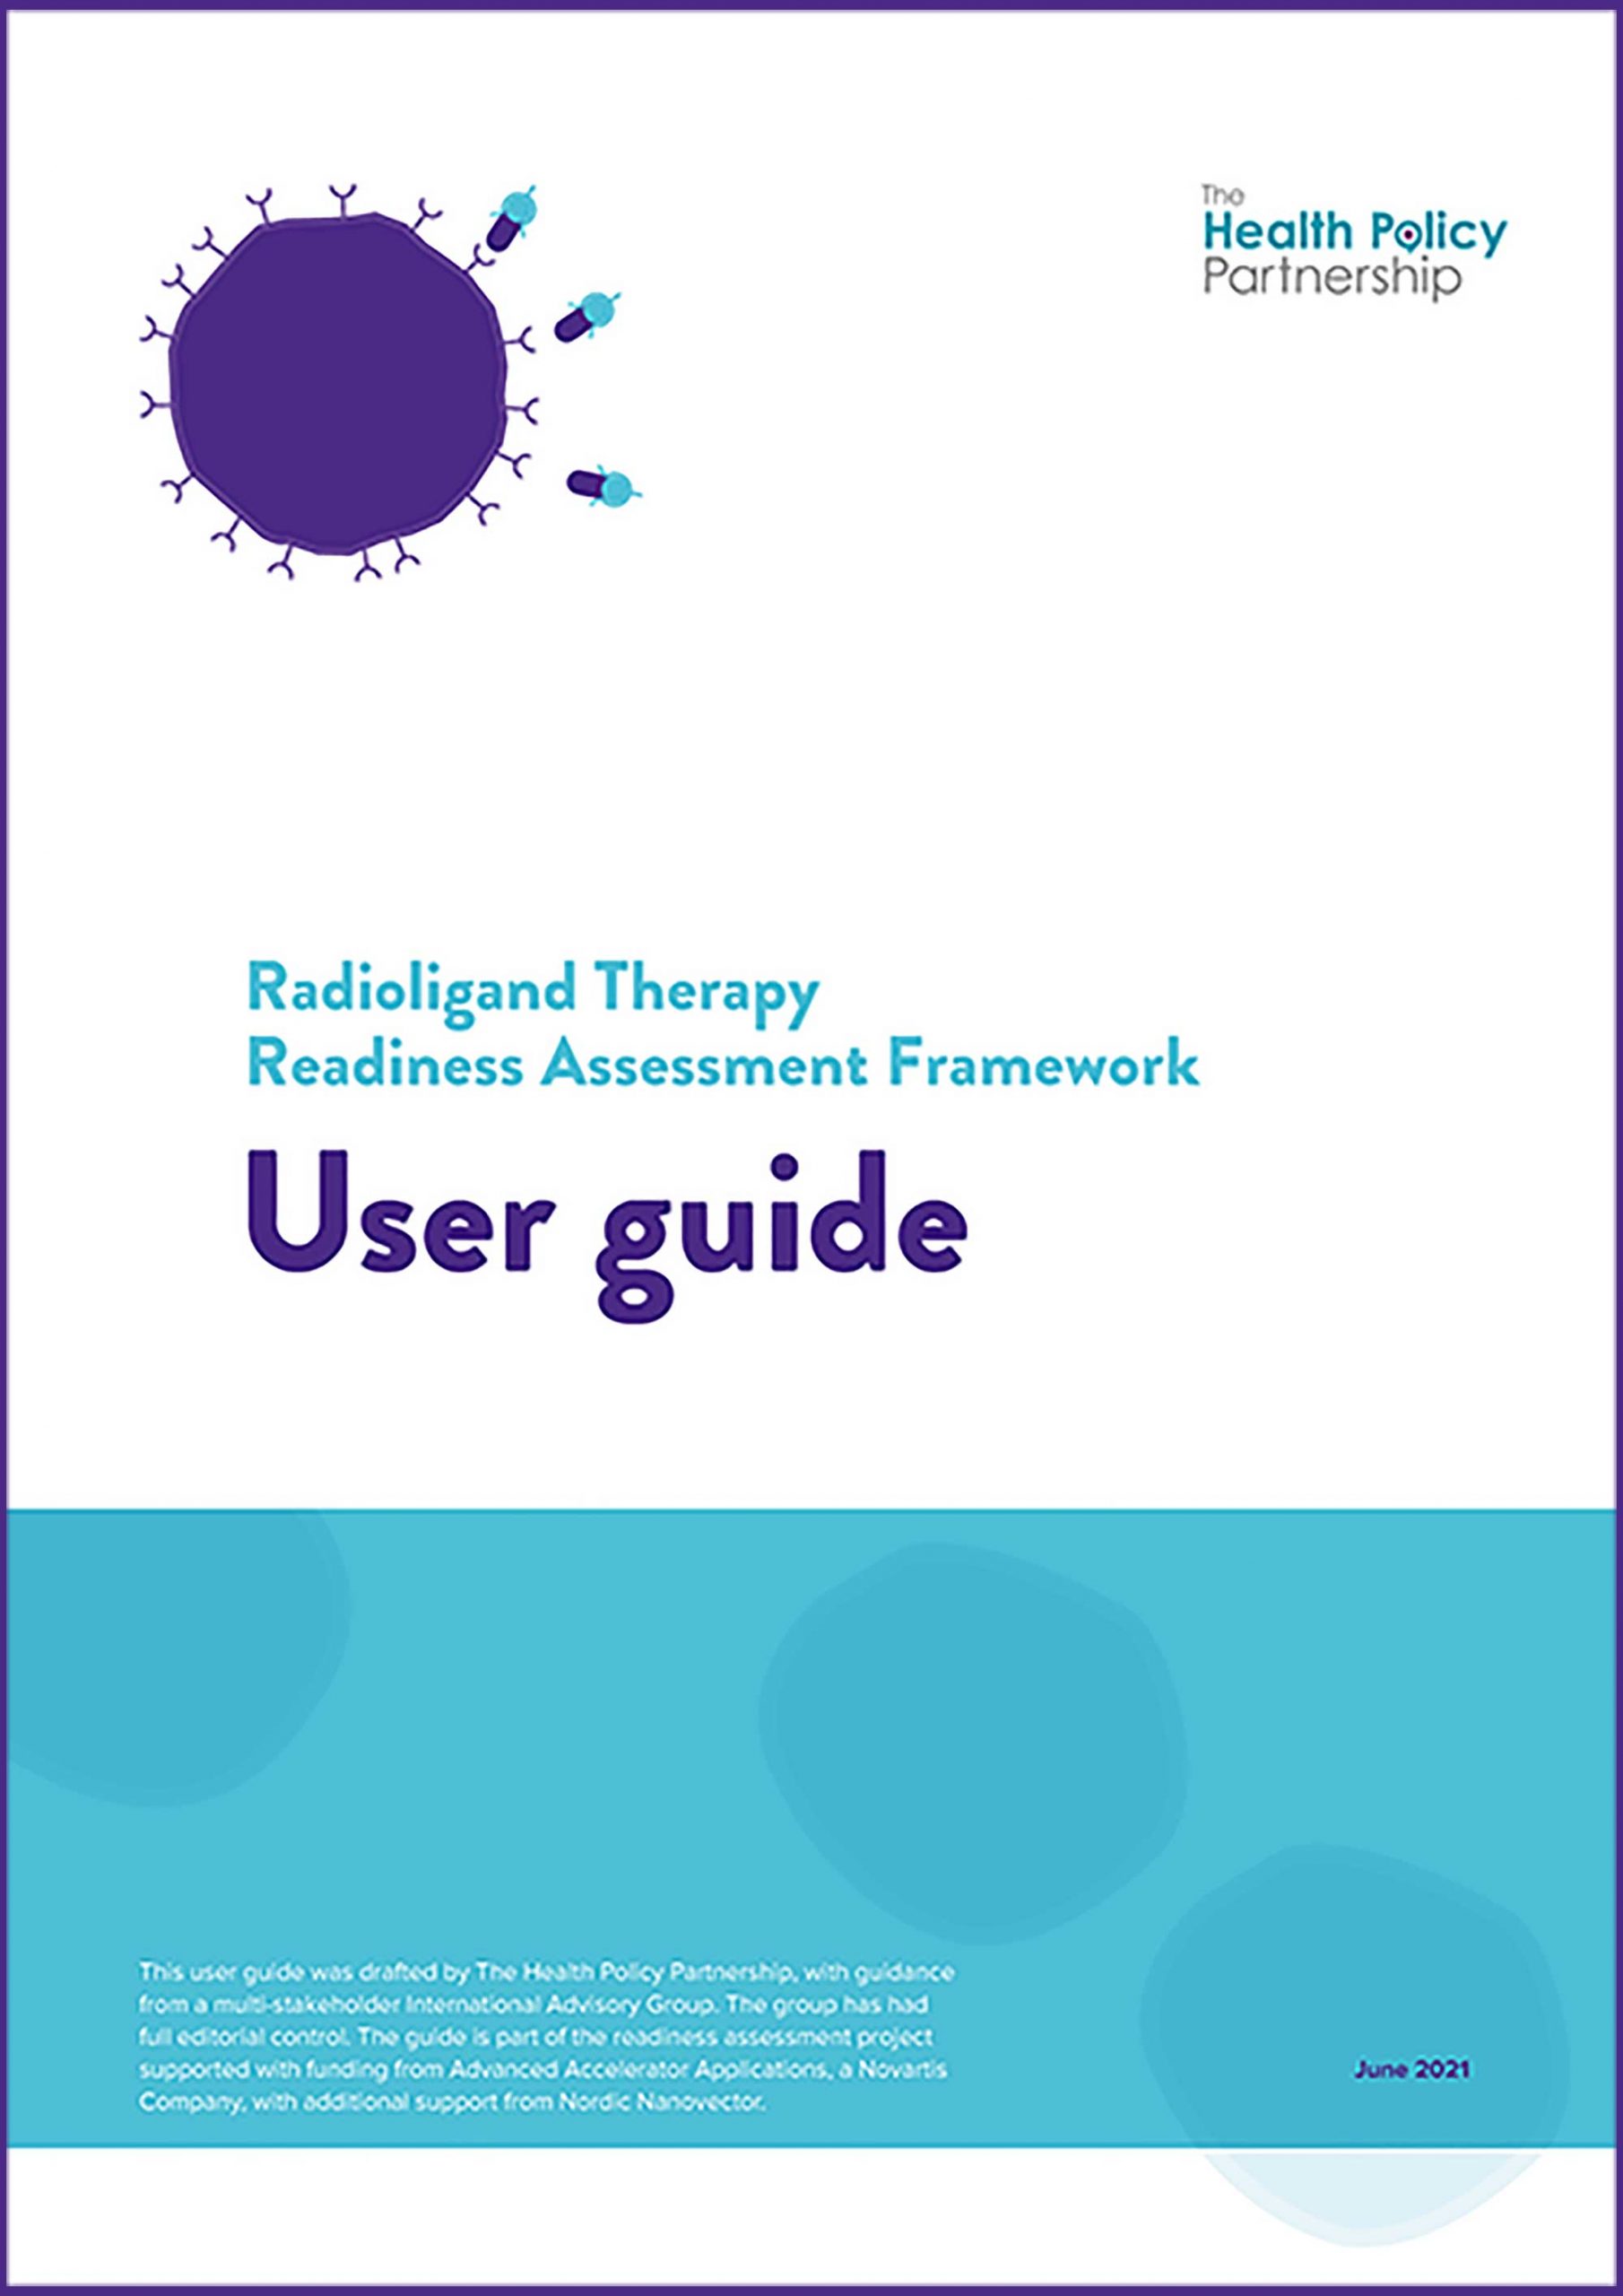 Radioligand Therapy Readiness Assessment Framework